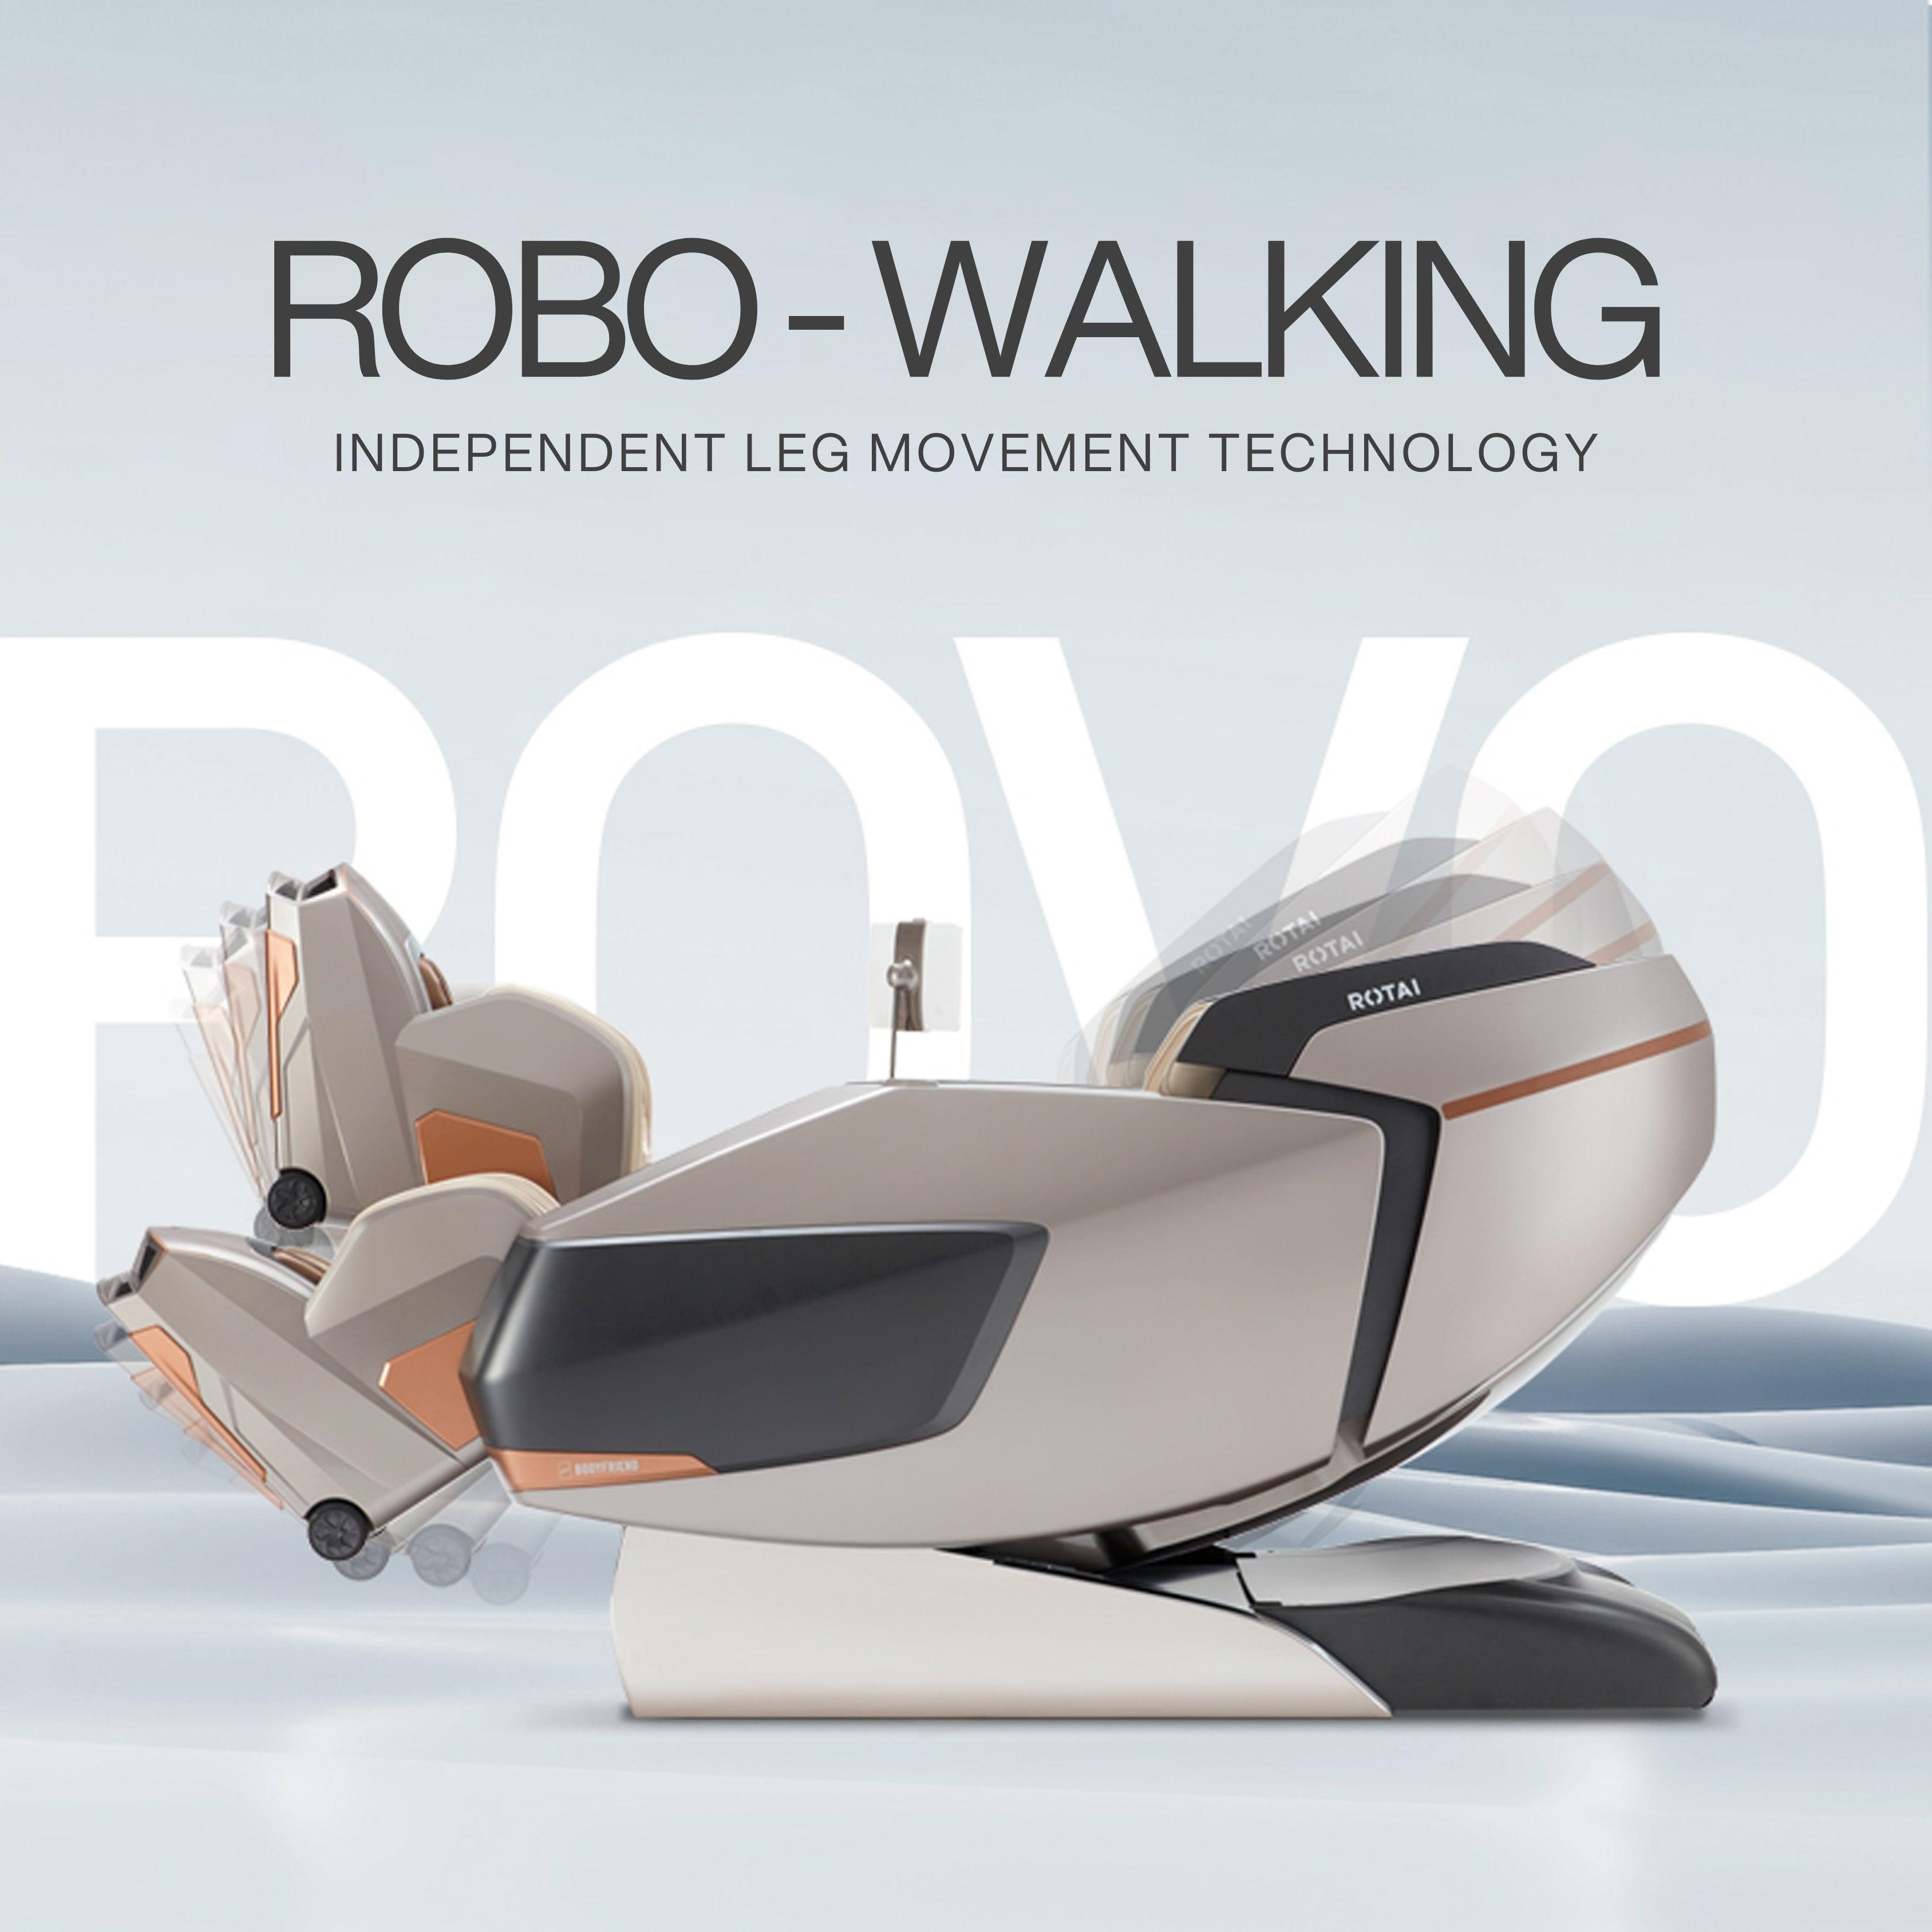 AI Robotic Massage Chair with Rovo-Walking Technology in Glacier Silver - Best Massage Chair UAE, Dubai